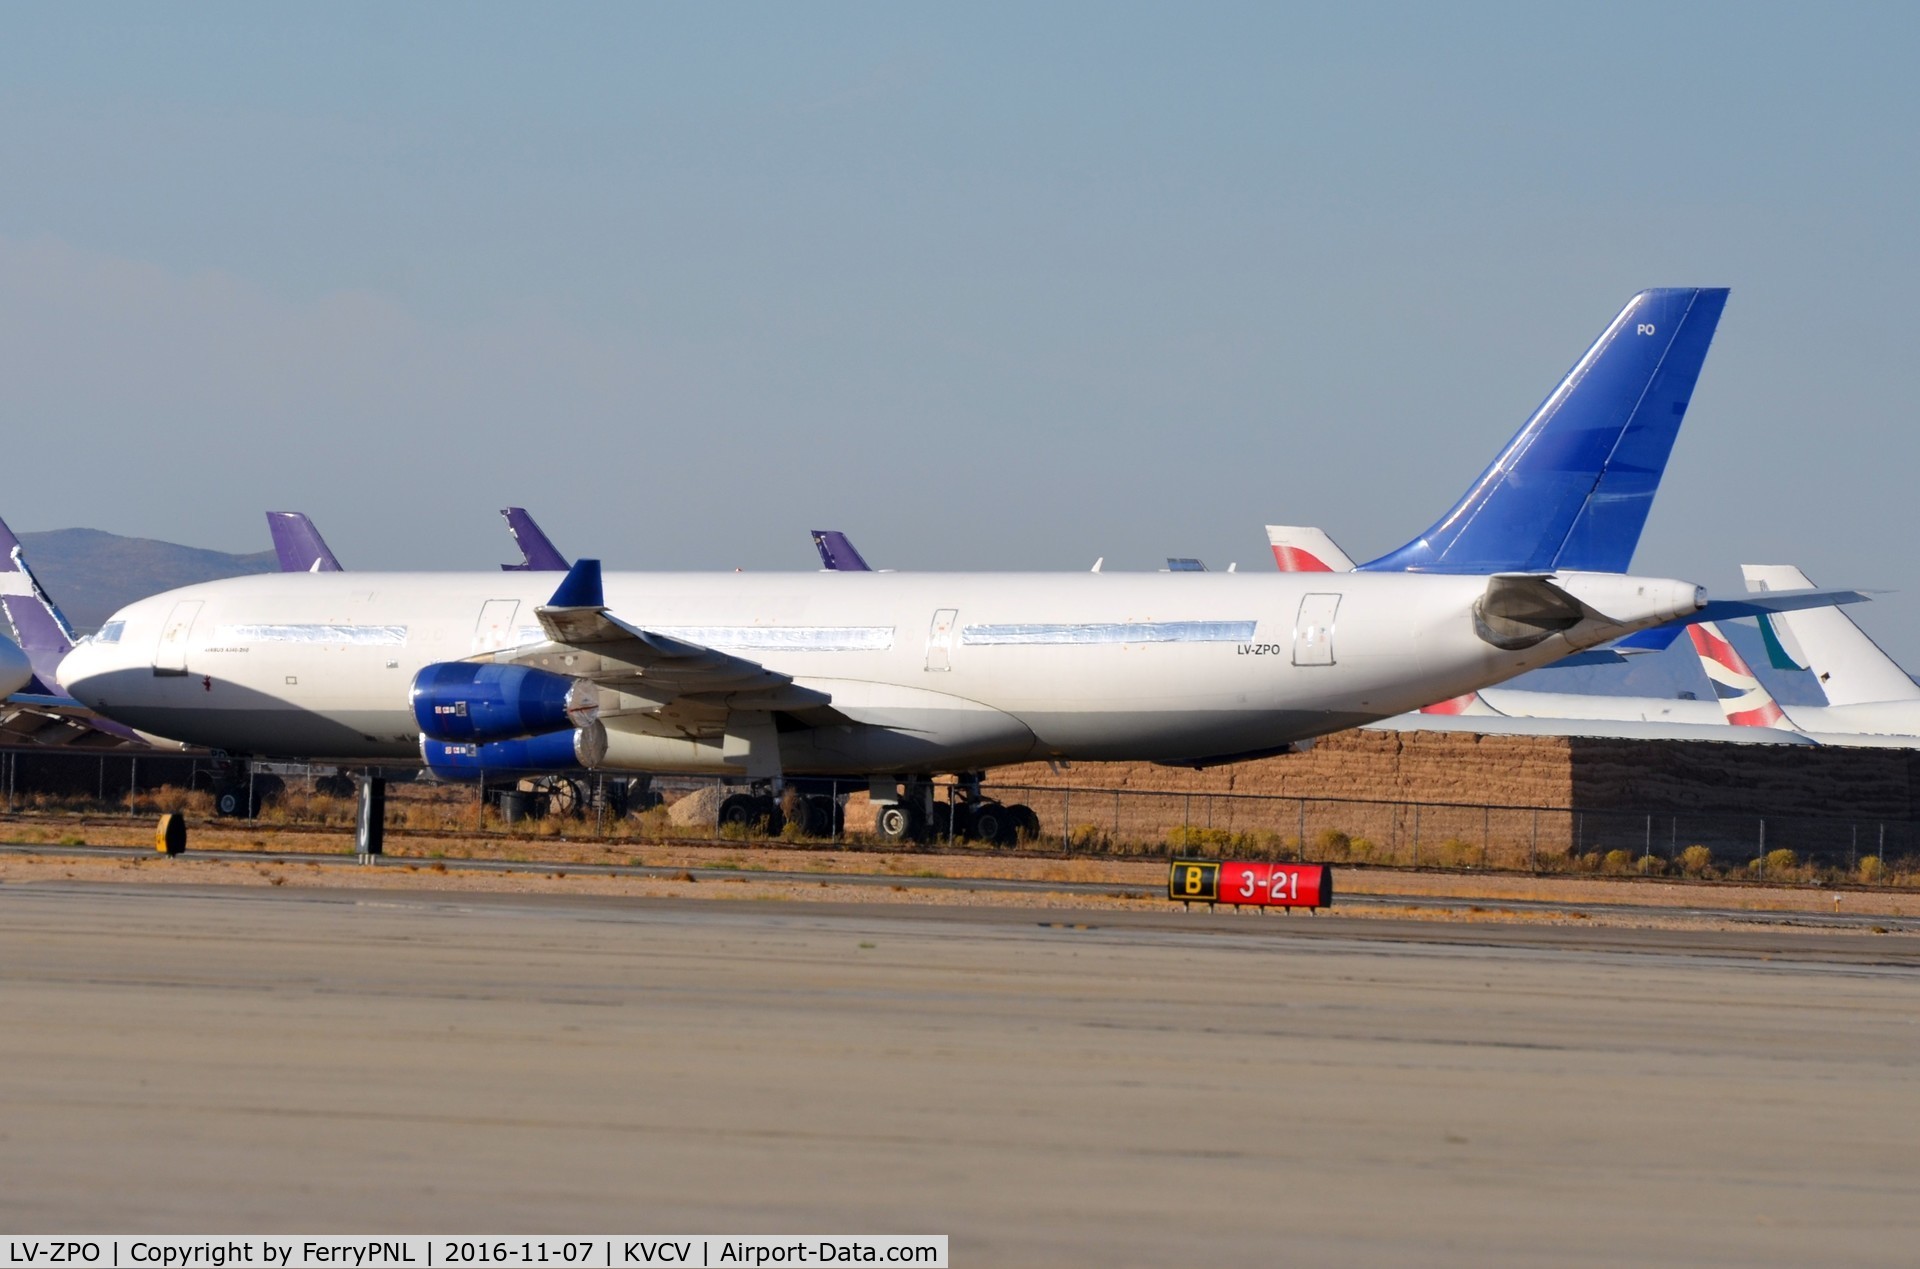 LV-ZPO, 1993 Airbus A340-211 C/N 063, Aerolineas Argentinas A342 stored in VCV since Sept 2014.